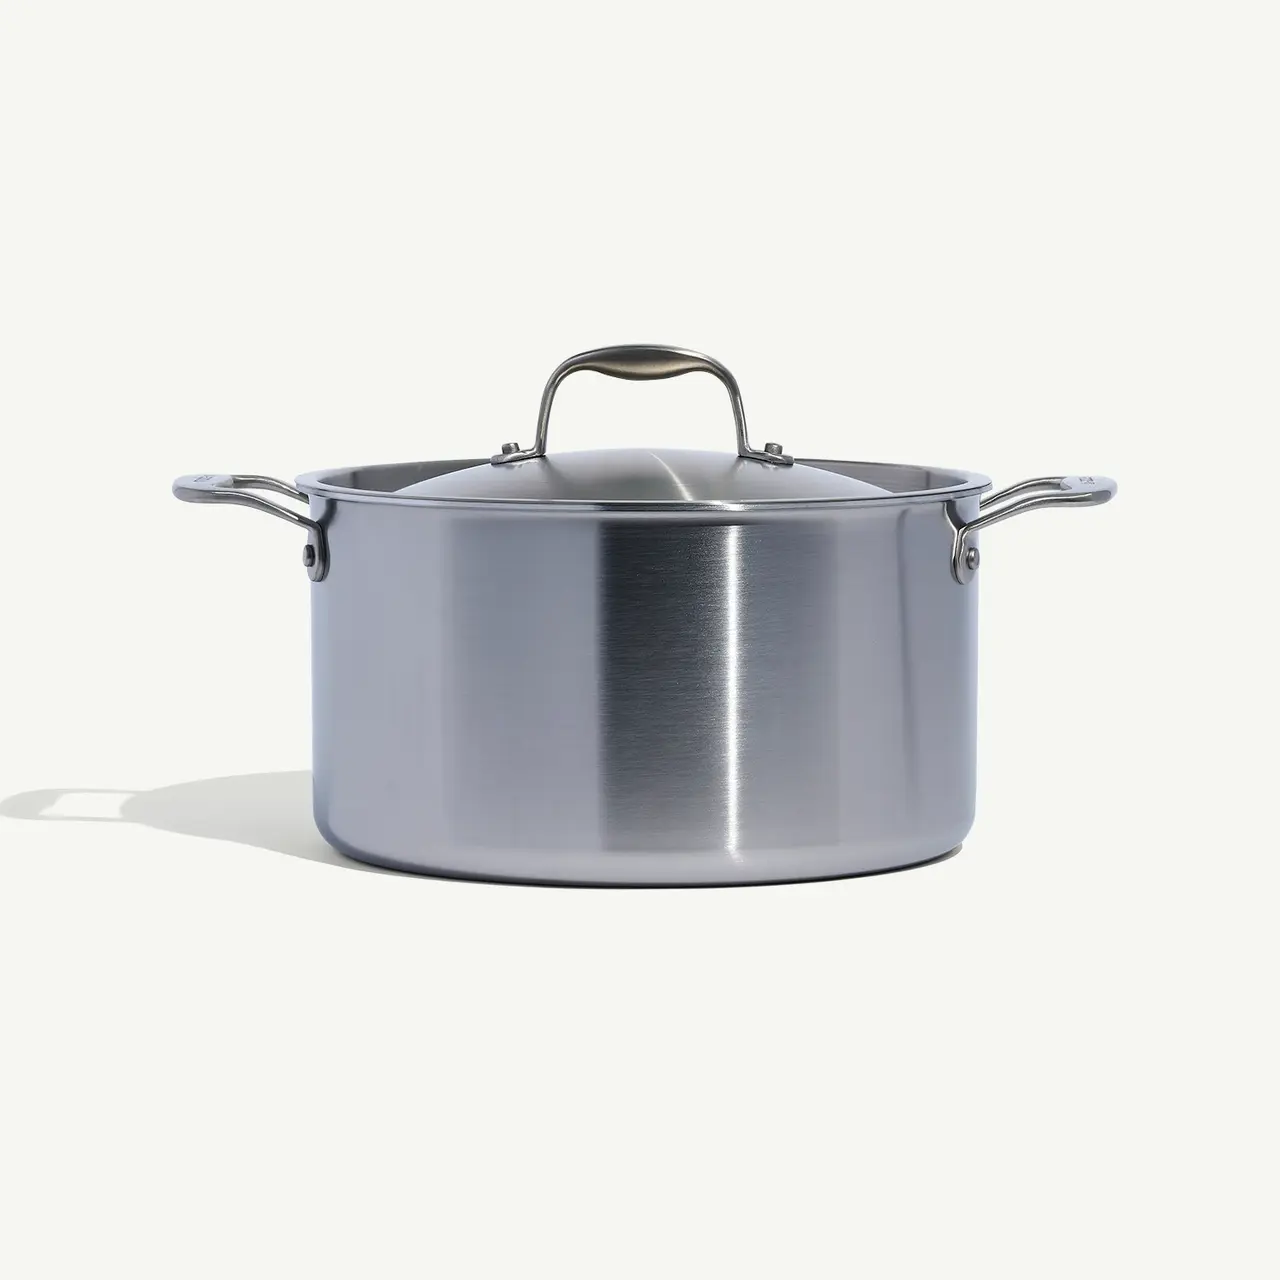 A stainless steel cooking pot with a lid on a plain background.